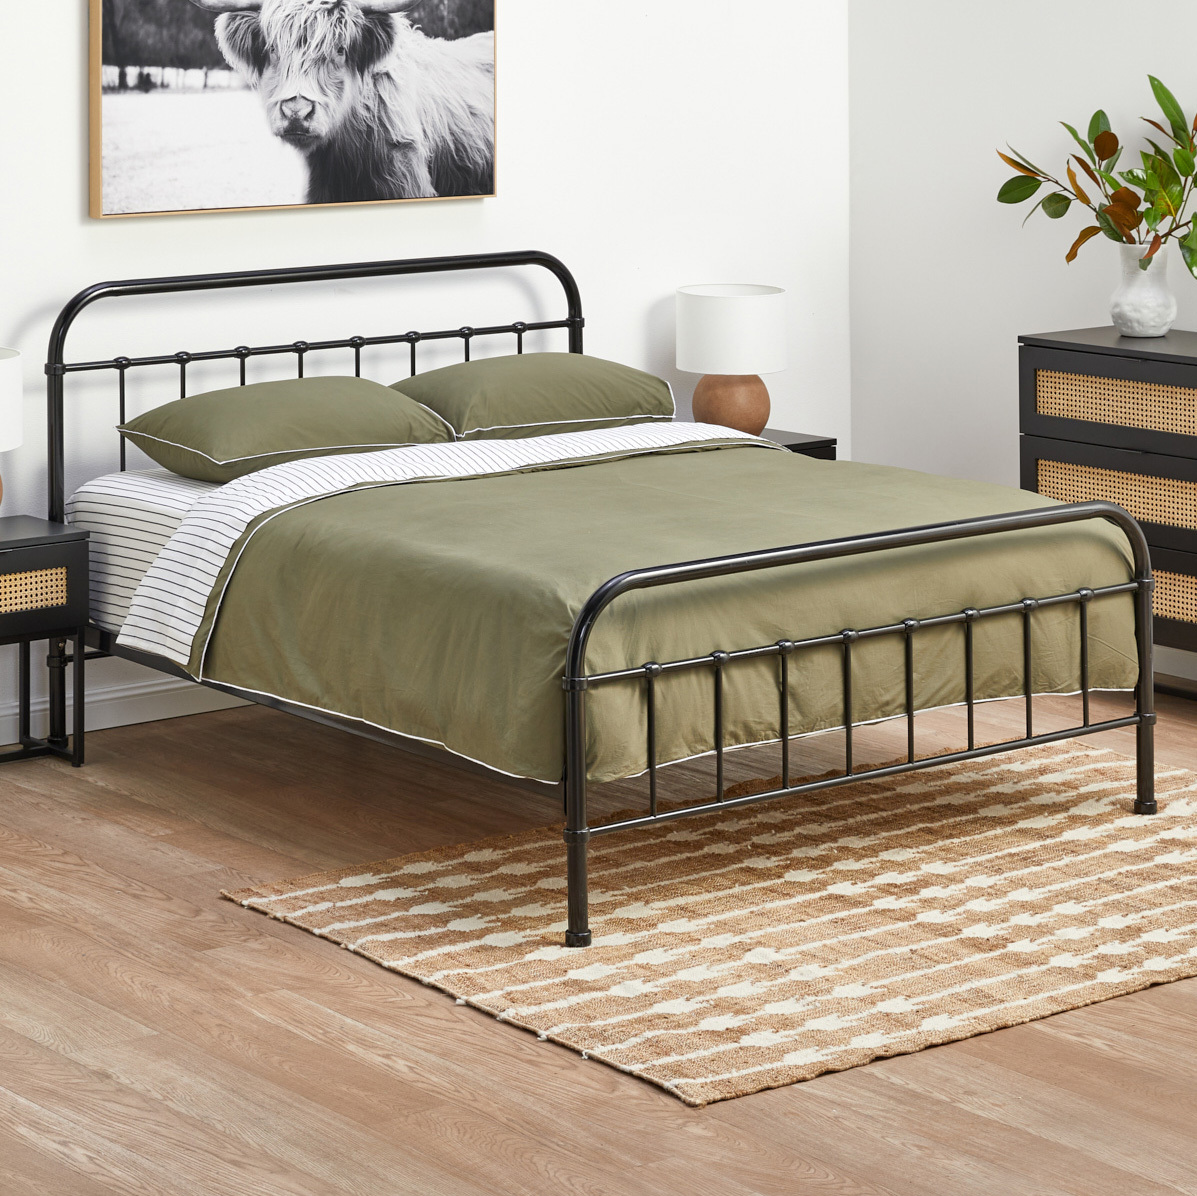 Black Bailey Metal Bed Frame, How Much Does A Queen Size Metal Bed Frame Weight